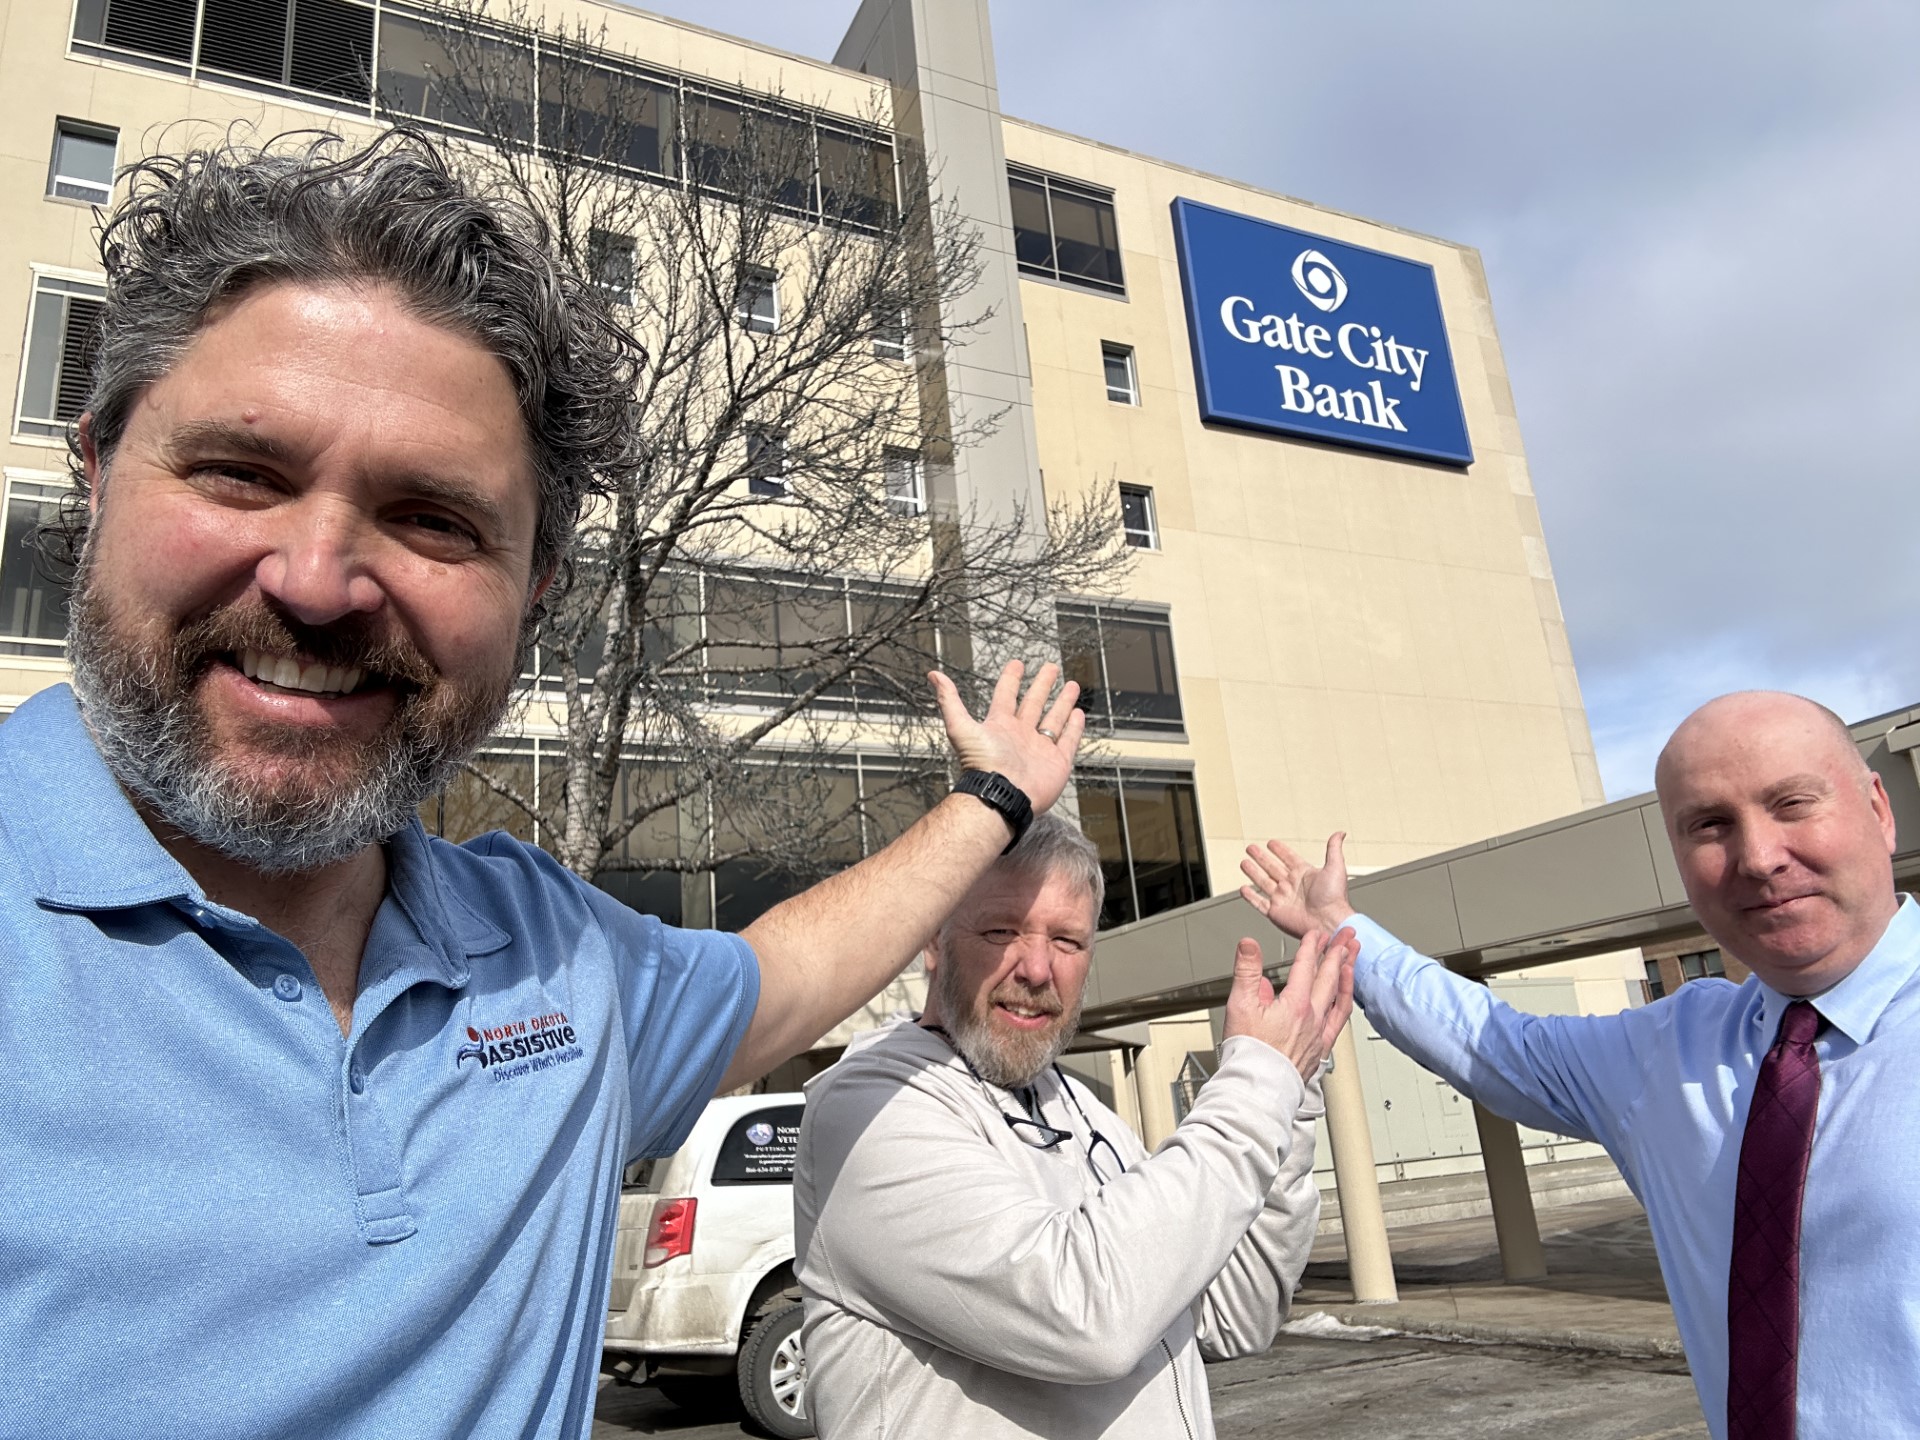 Tom Gerhardt and Mike Chaussee of North Dakota Assistive join Kevin Warner of Gate City Bank in Fargo outside of the downtown office for a photo. The Gate City Bank logo is in the back on the outside of the building, and Tom, Mike, and Kevin are all gesturing toward it with their arms in the air.